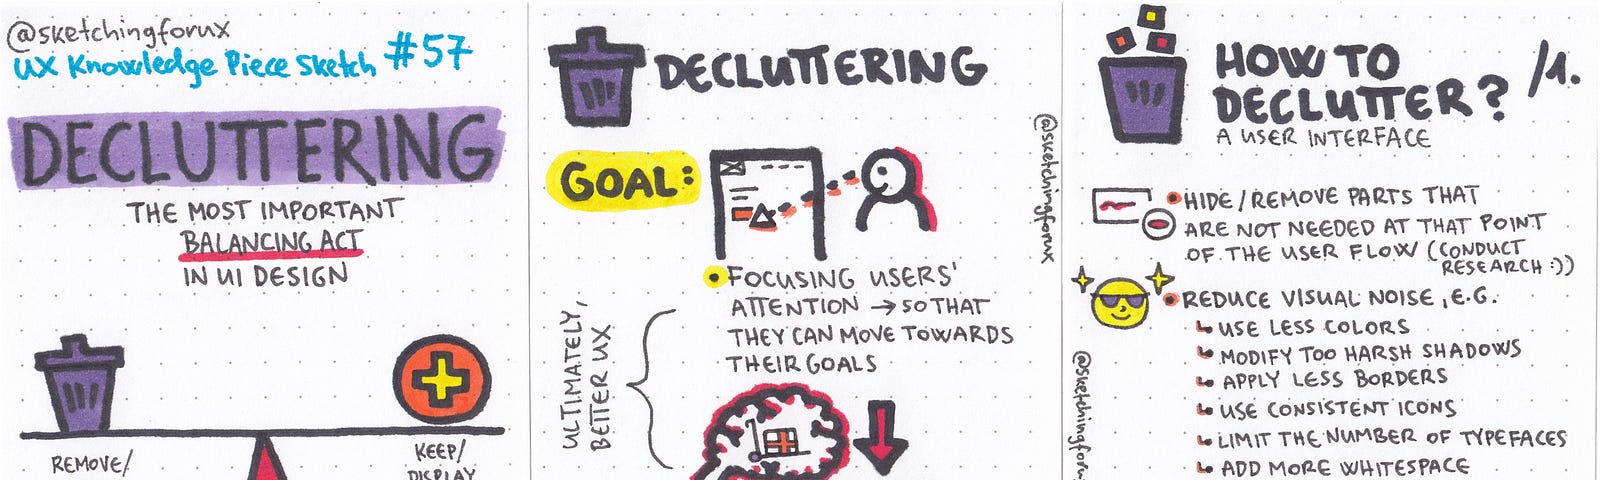 My UX Knowledge Piece Skecth about decluttering in UI design